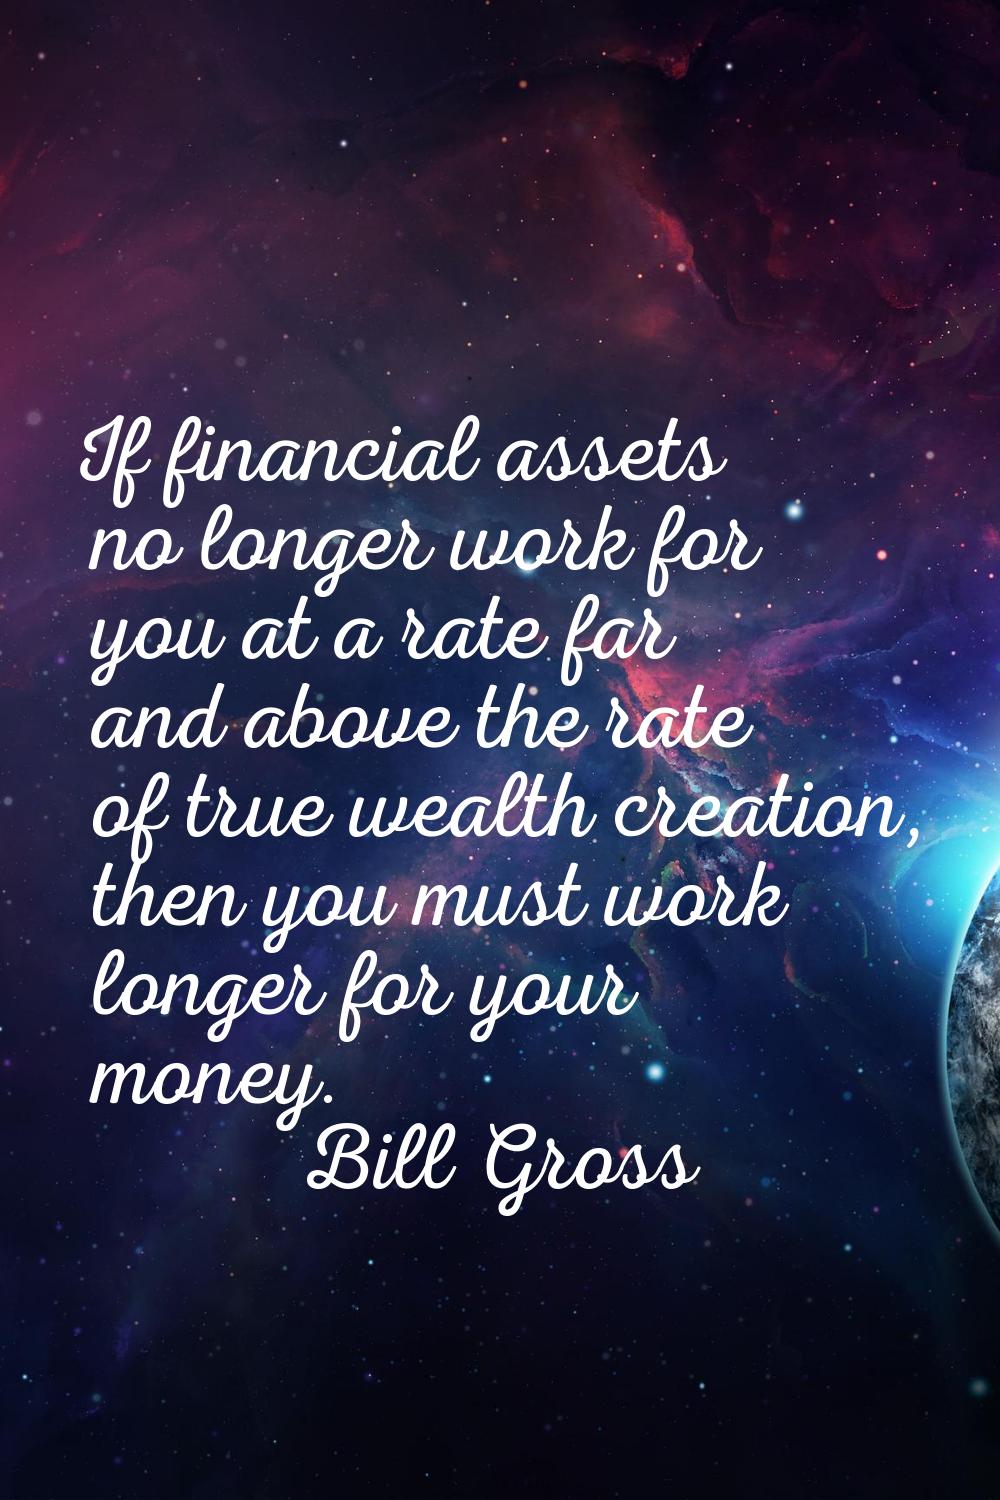 If financial assets no longer work for you at a rate far and above the rate of true wealth creation